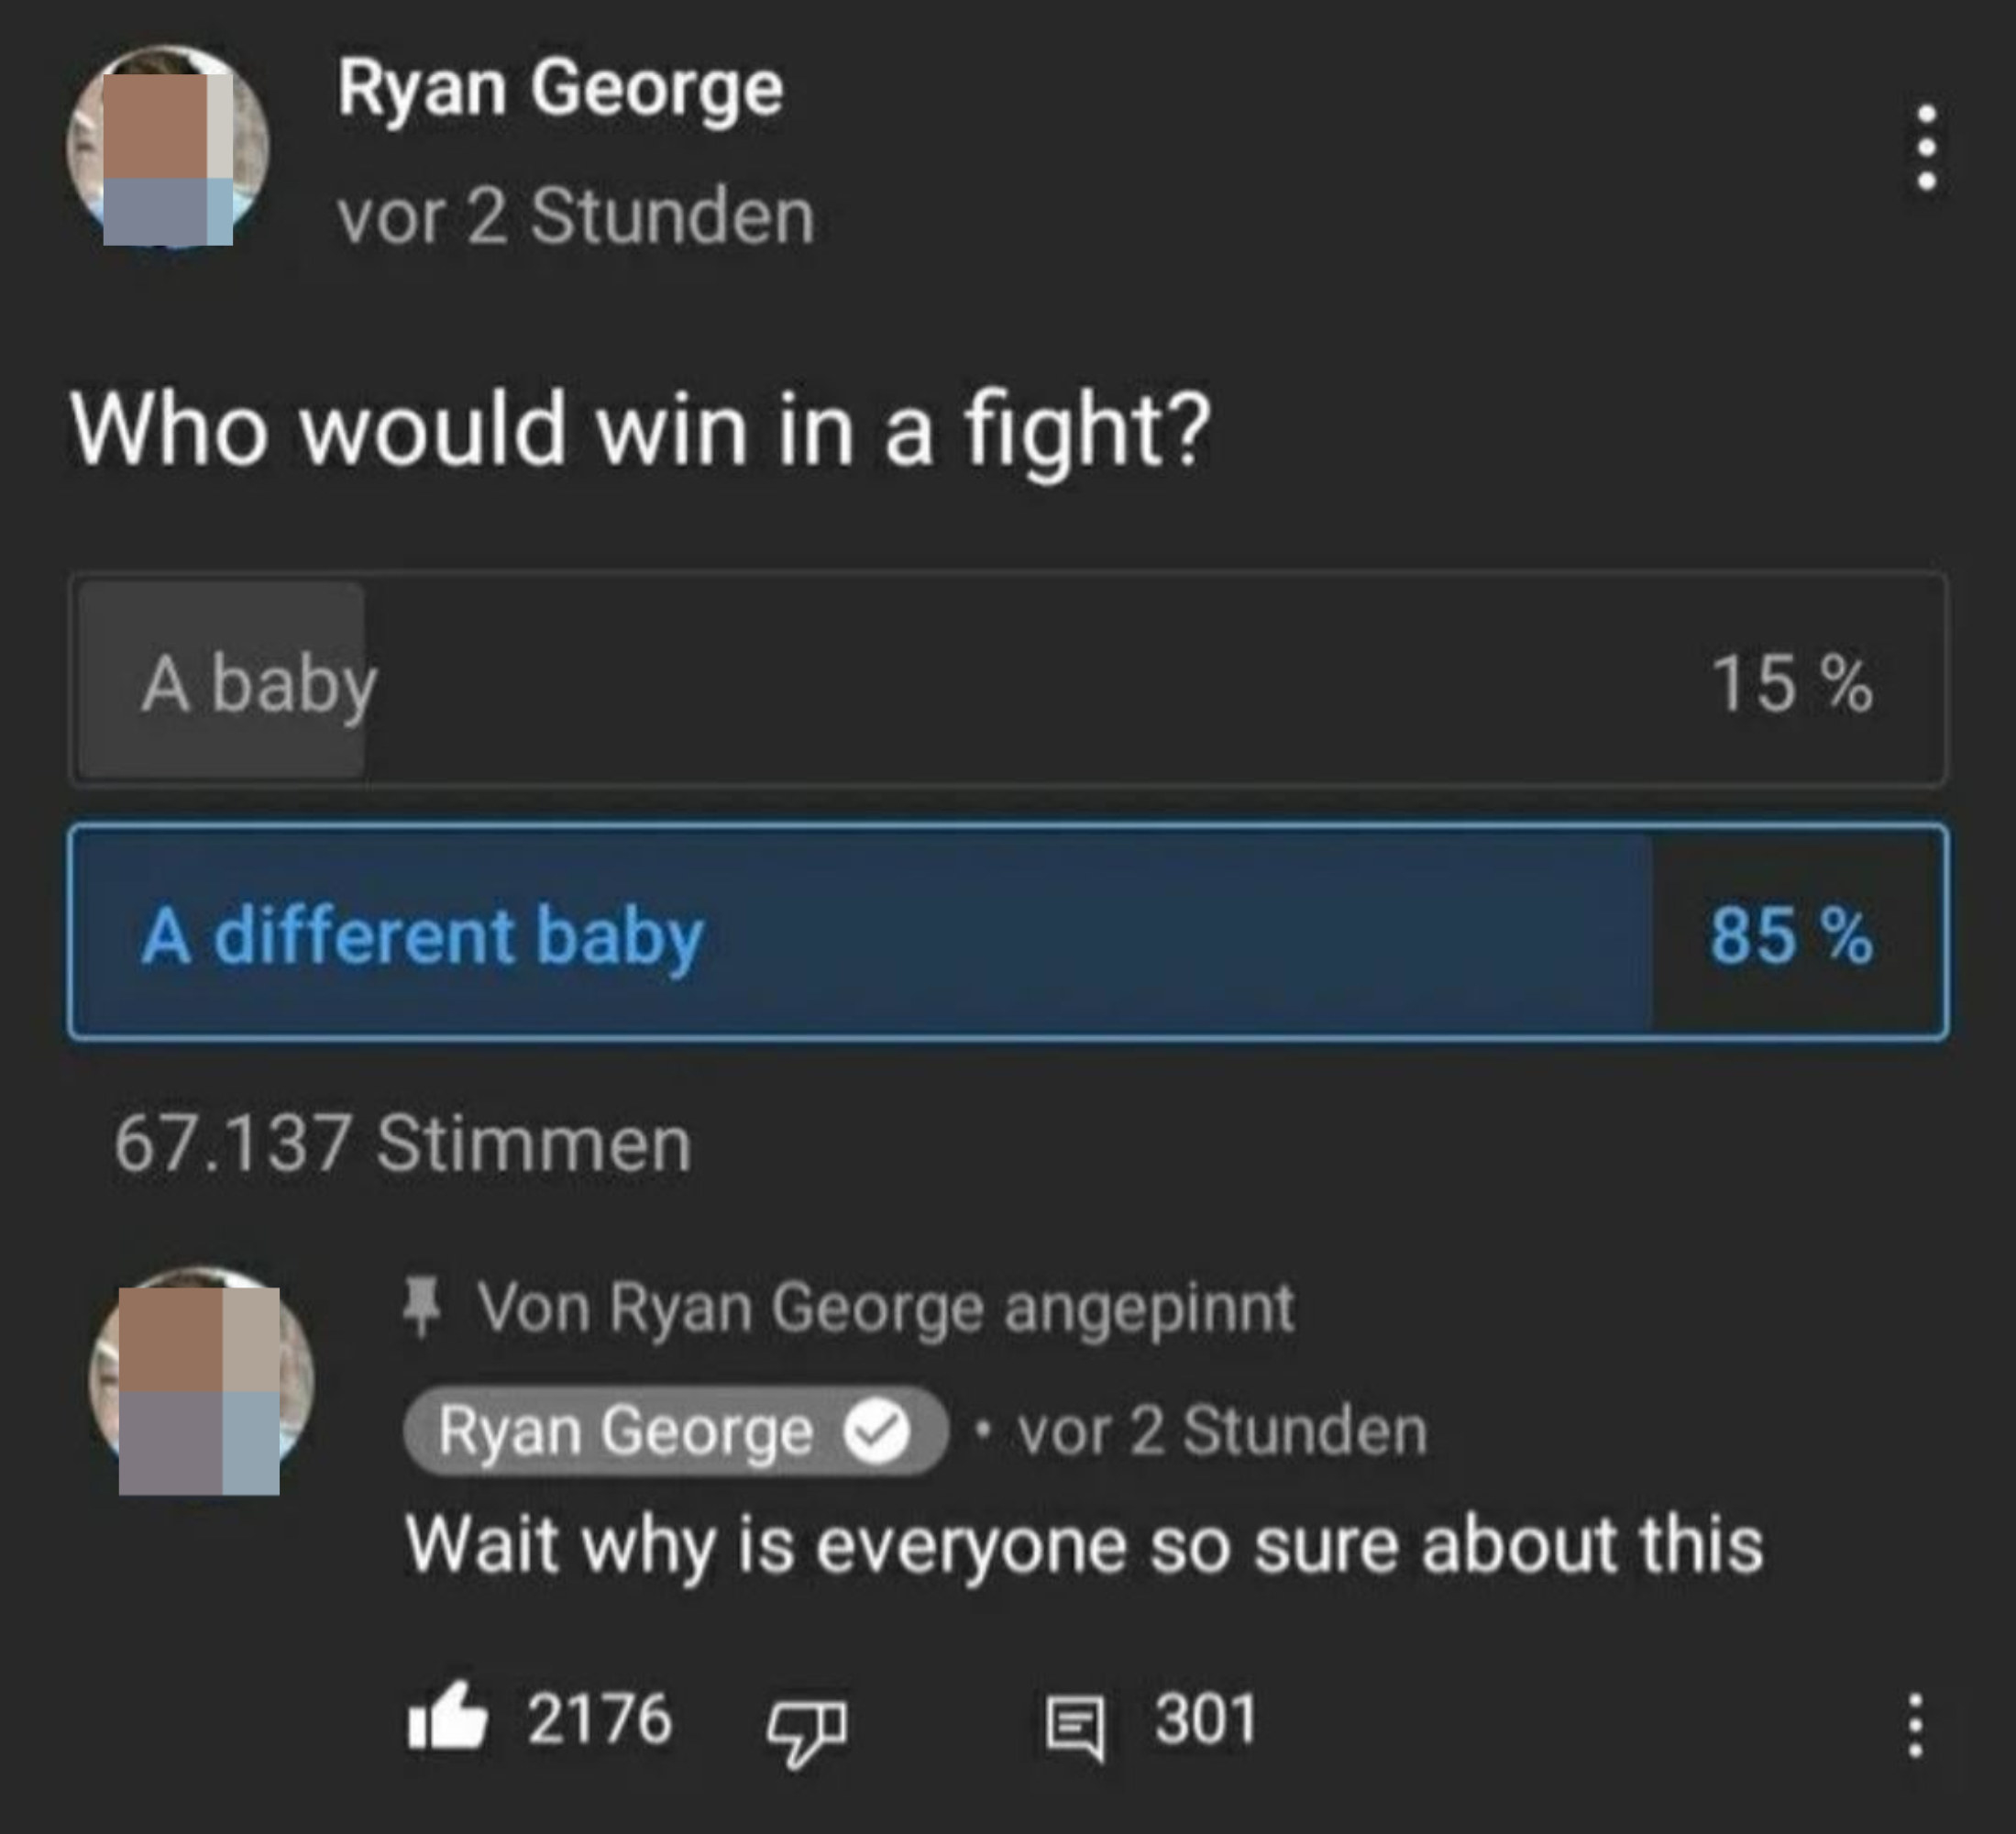 Poll about who would win a baby or a different baby, and everyone picks a different baby, which has the poll taker asking why everyone is so sure